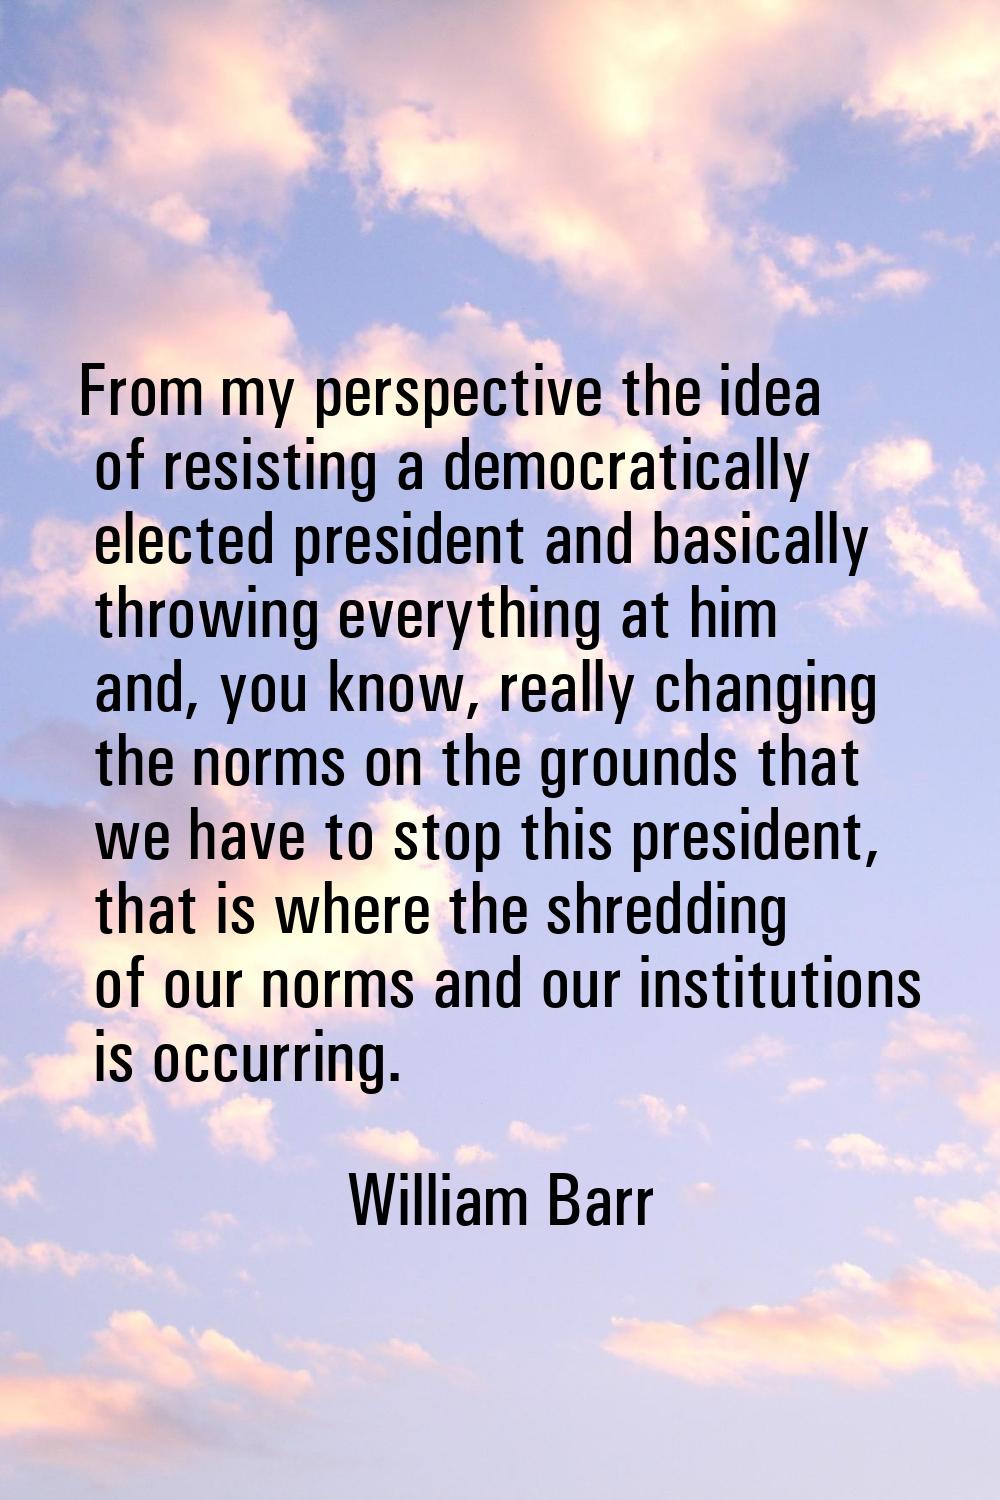 From my perspective the idea of resisting a democratically elected president and basically throwing